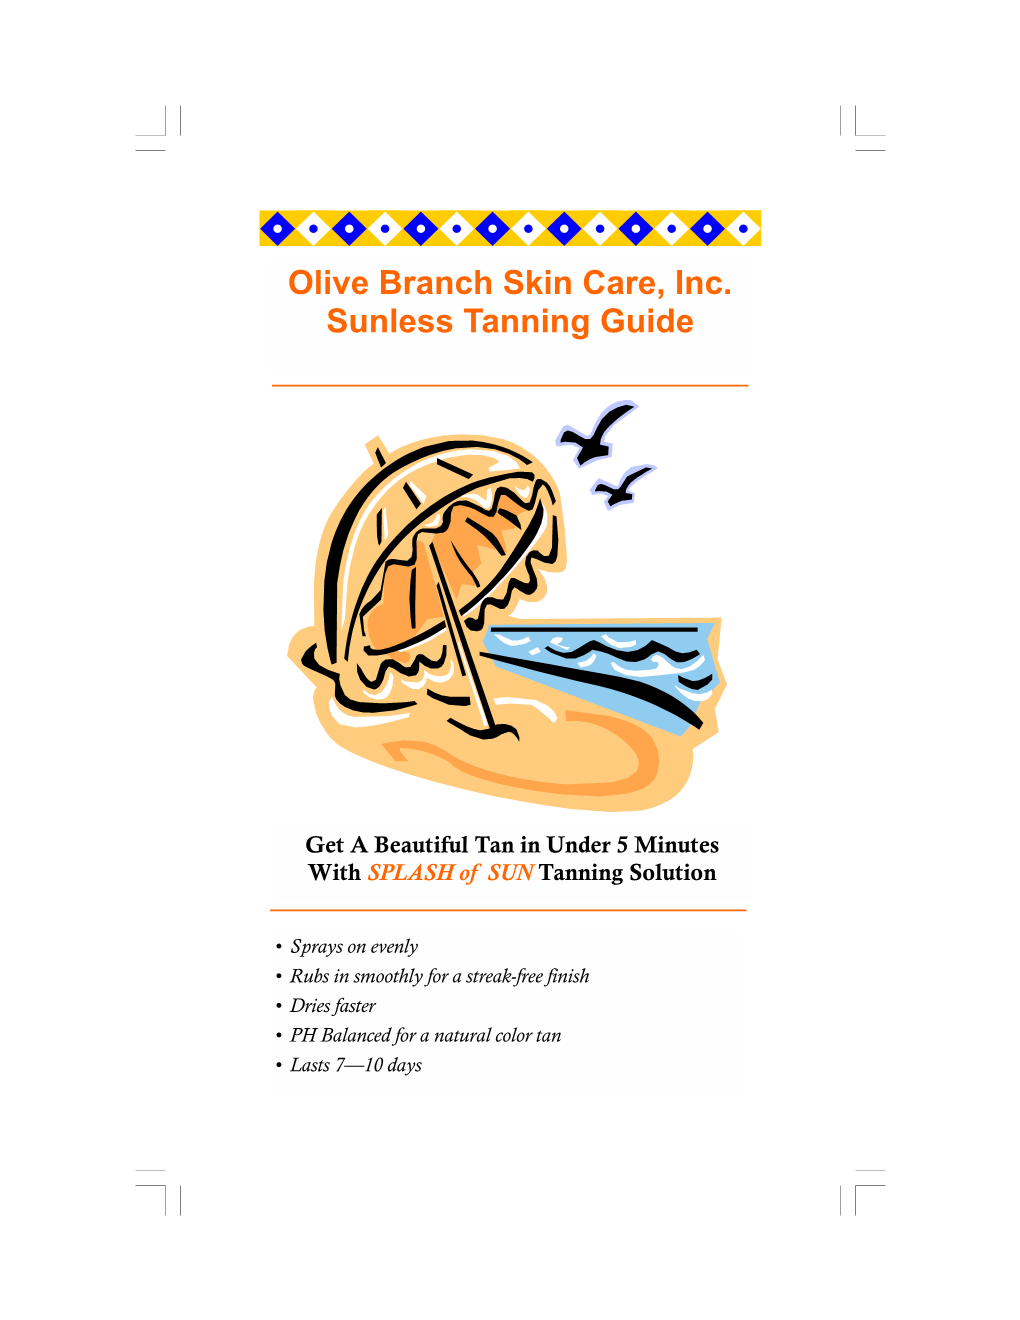 Olive Branch Skin Care, Inc. Sunless Tanning Guide